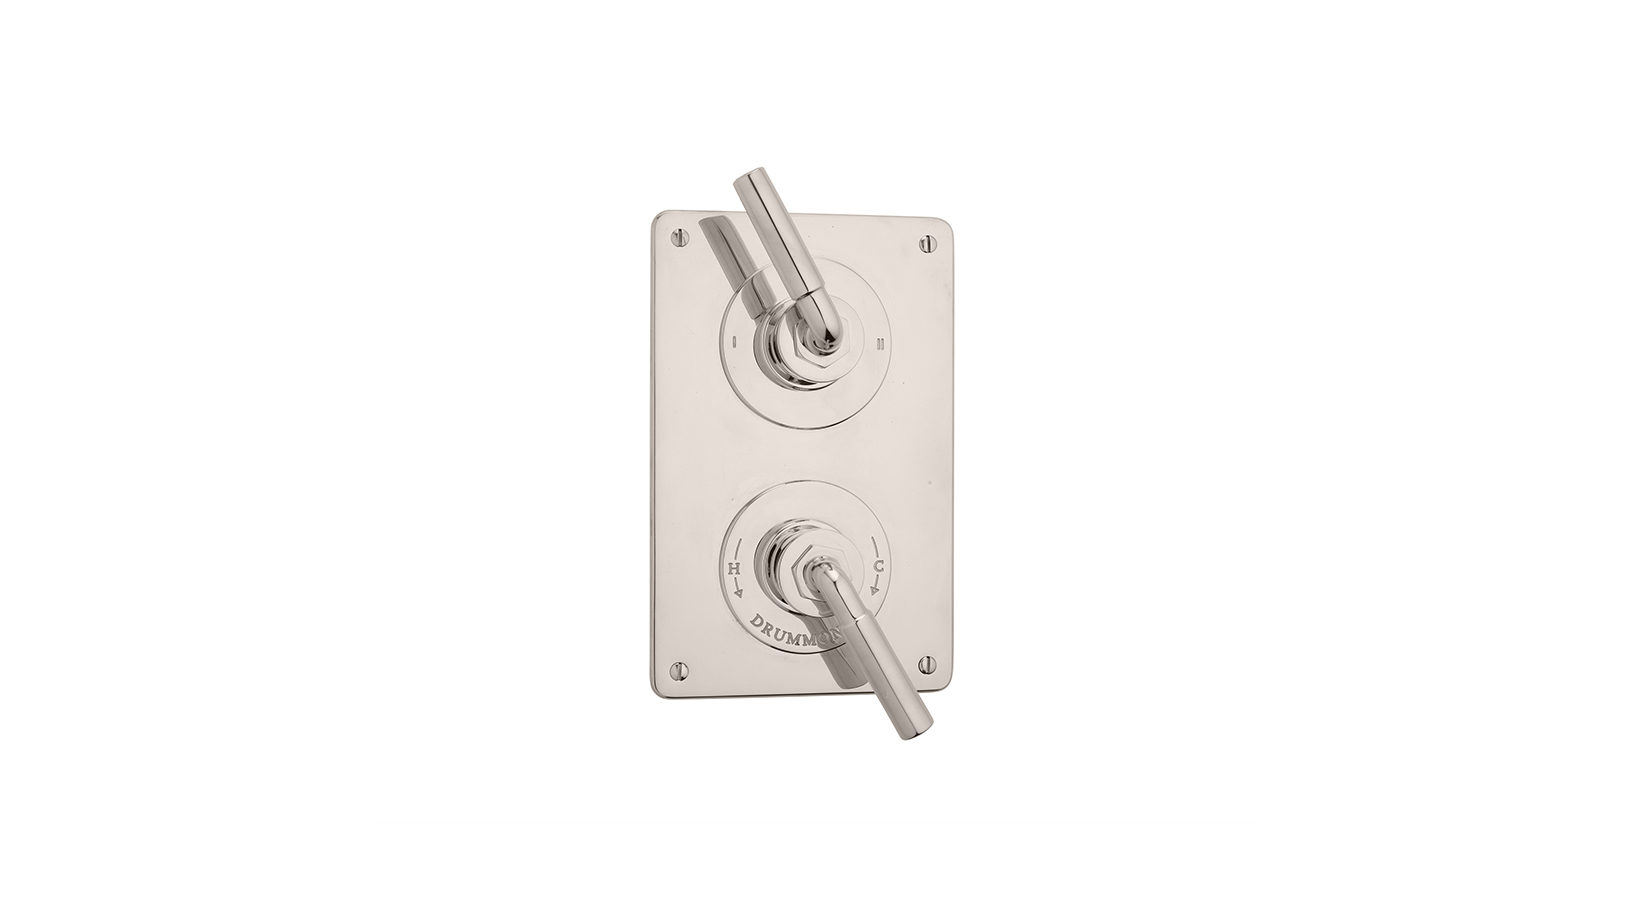 The Bestwood Lever Shower Plate Thermo & 2 Way